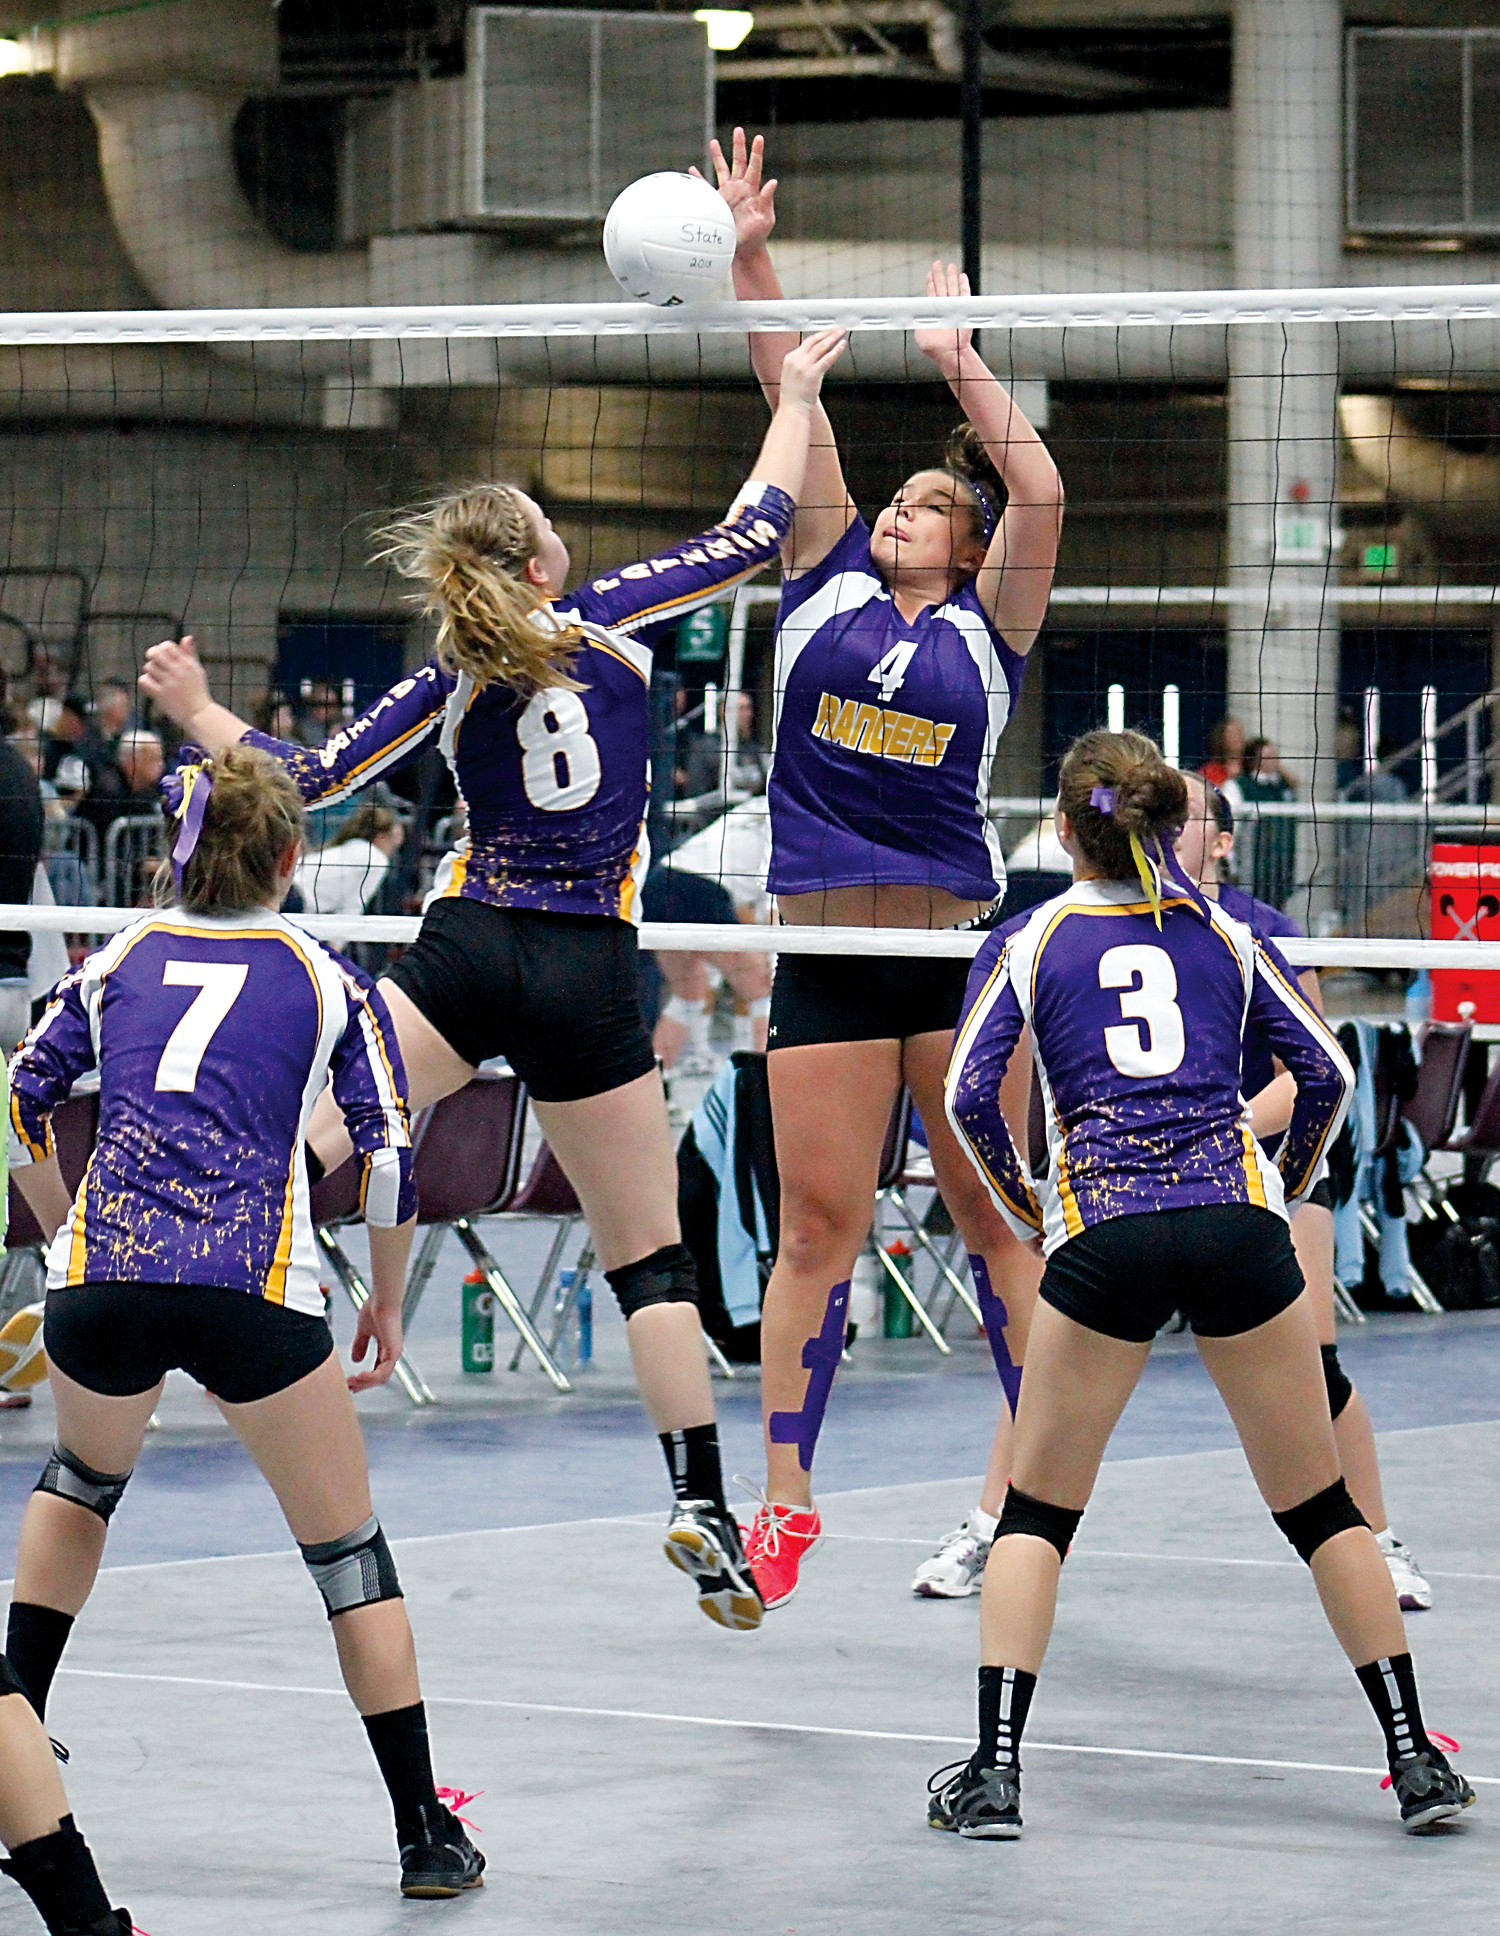 Quilcene junior Sammy Rae (4) blocks a spike attempt by Pateros senior Chloe Gill (8) during the opening round of the state 1B volleyball tournament. Roger Harnack/The Omak-Okanogan County Chronicle